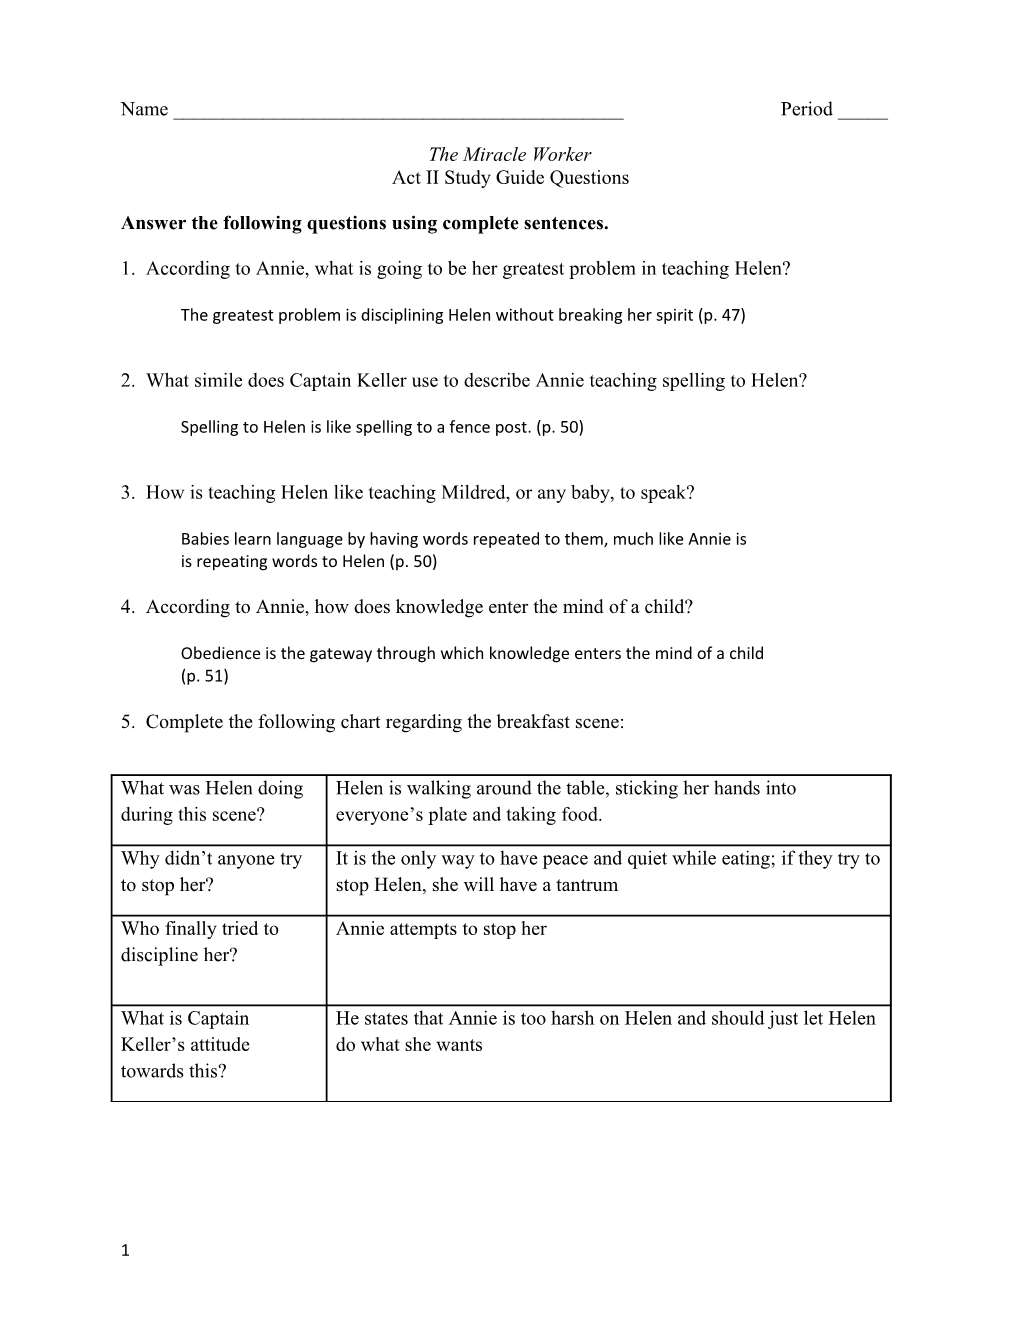 MW Act 2 Study Guide 2014 With Answers